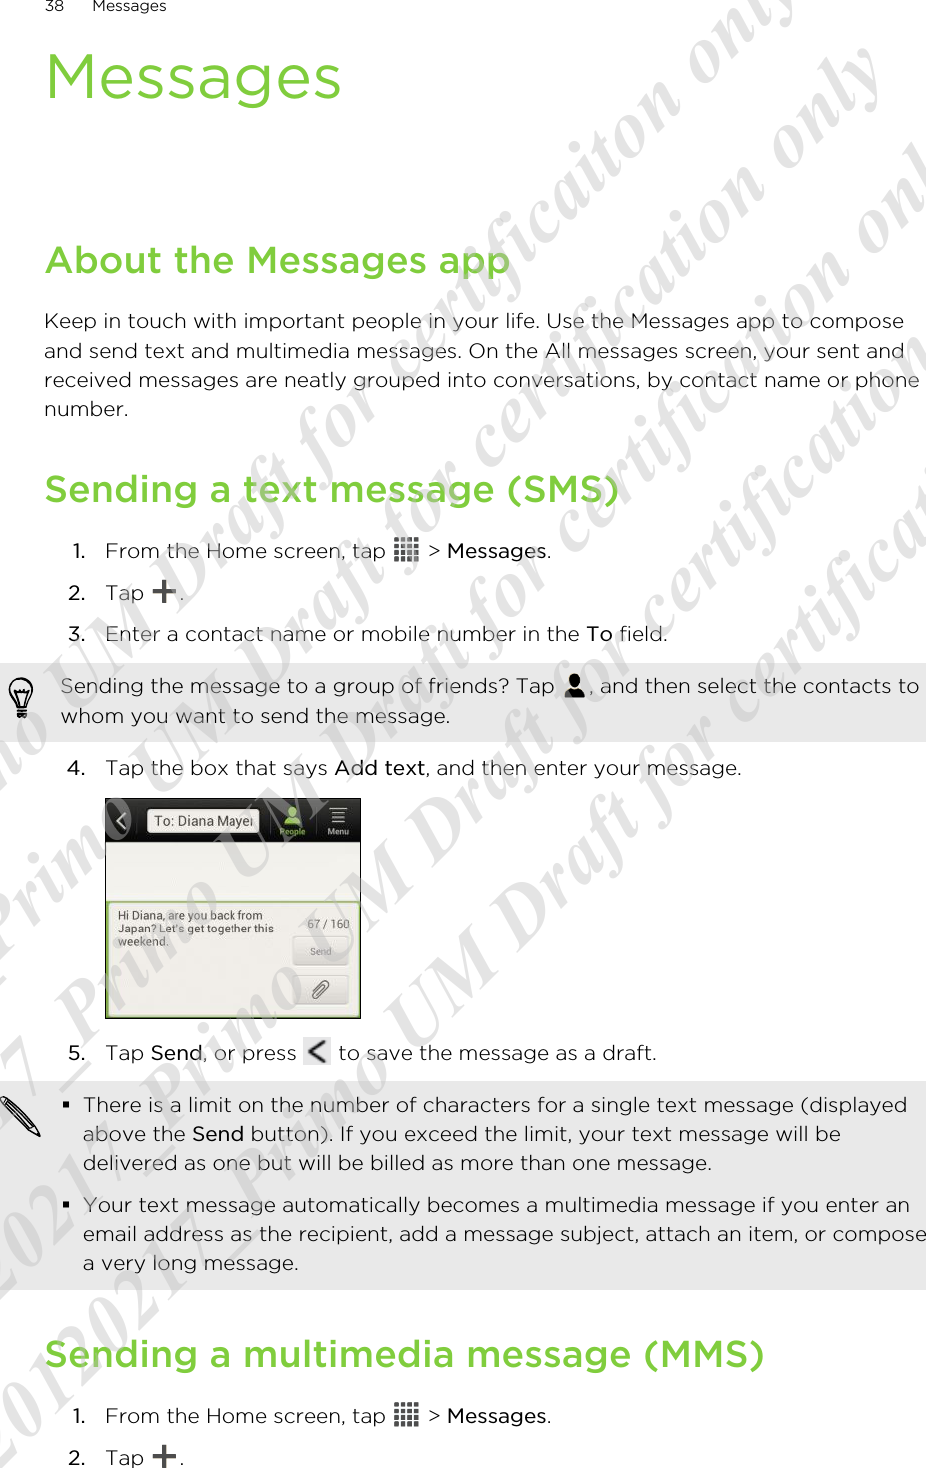 MessagesAbout the Messages appKeep in touch with important people in your life. Use the Messages app to composeand send text and multimedia messages. On the All messages screen, your sent andreceived messages are neatly grouped into conversations, by contact name or phonenumber.Sending a text message (SMS)1. From the Home screen, tap   &gt; Messages.2. Tap  .3. Enter a contact name or mobile number in the To field. Sending the message to a group of friends? Tap  , and then select the contacts towhom you want to send the message.4. Tap the box that says Add text, and then enter your message. 5. Tap Send, or press   to save the message as a draft. §There is a limit on the number of characters for a single text message (displayedabove the Send button). If you exceed the limit, your text message will bedelivered as one but will be billed as more than one message.§Your text message automatically becomes a multimedia message if you enter anemail address as the recipient, add a message subject, attach an item, or composea very long message.Sending a multimedia message (MMS)1. From the Home screen, tap   &gt; Messages.2. Tap  .38 Messages20120217_Primo UM Draft for certificaiton only 20120217_Primo UM Draft for certification only 20120217_Primo UM Draft for certification only 20120217_Primo UM Draft for certification only 20120217_Primo UM Draft for certification only  